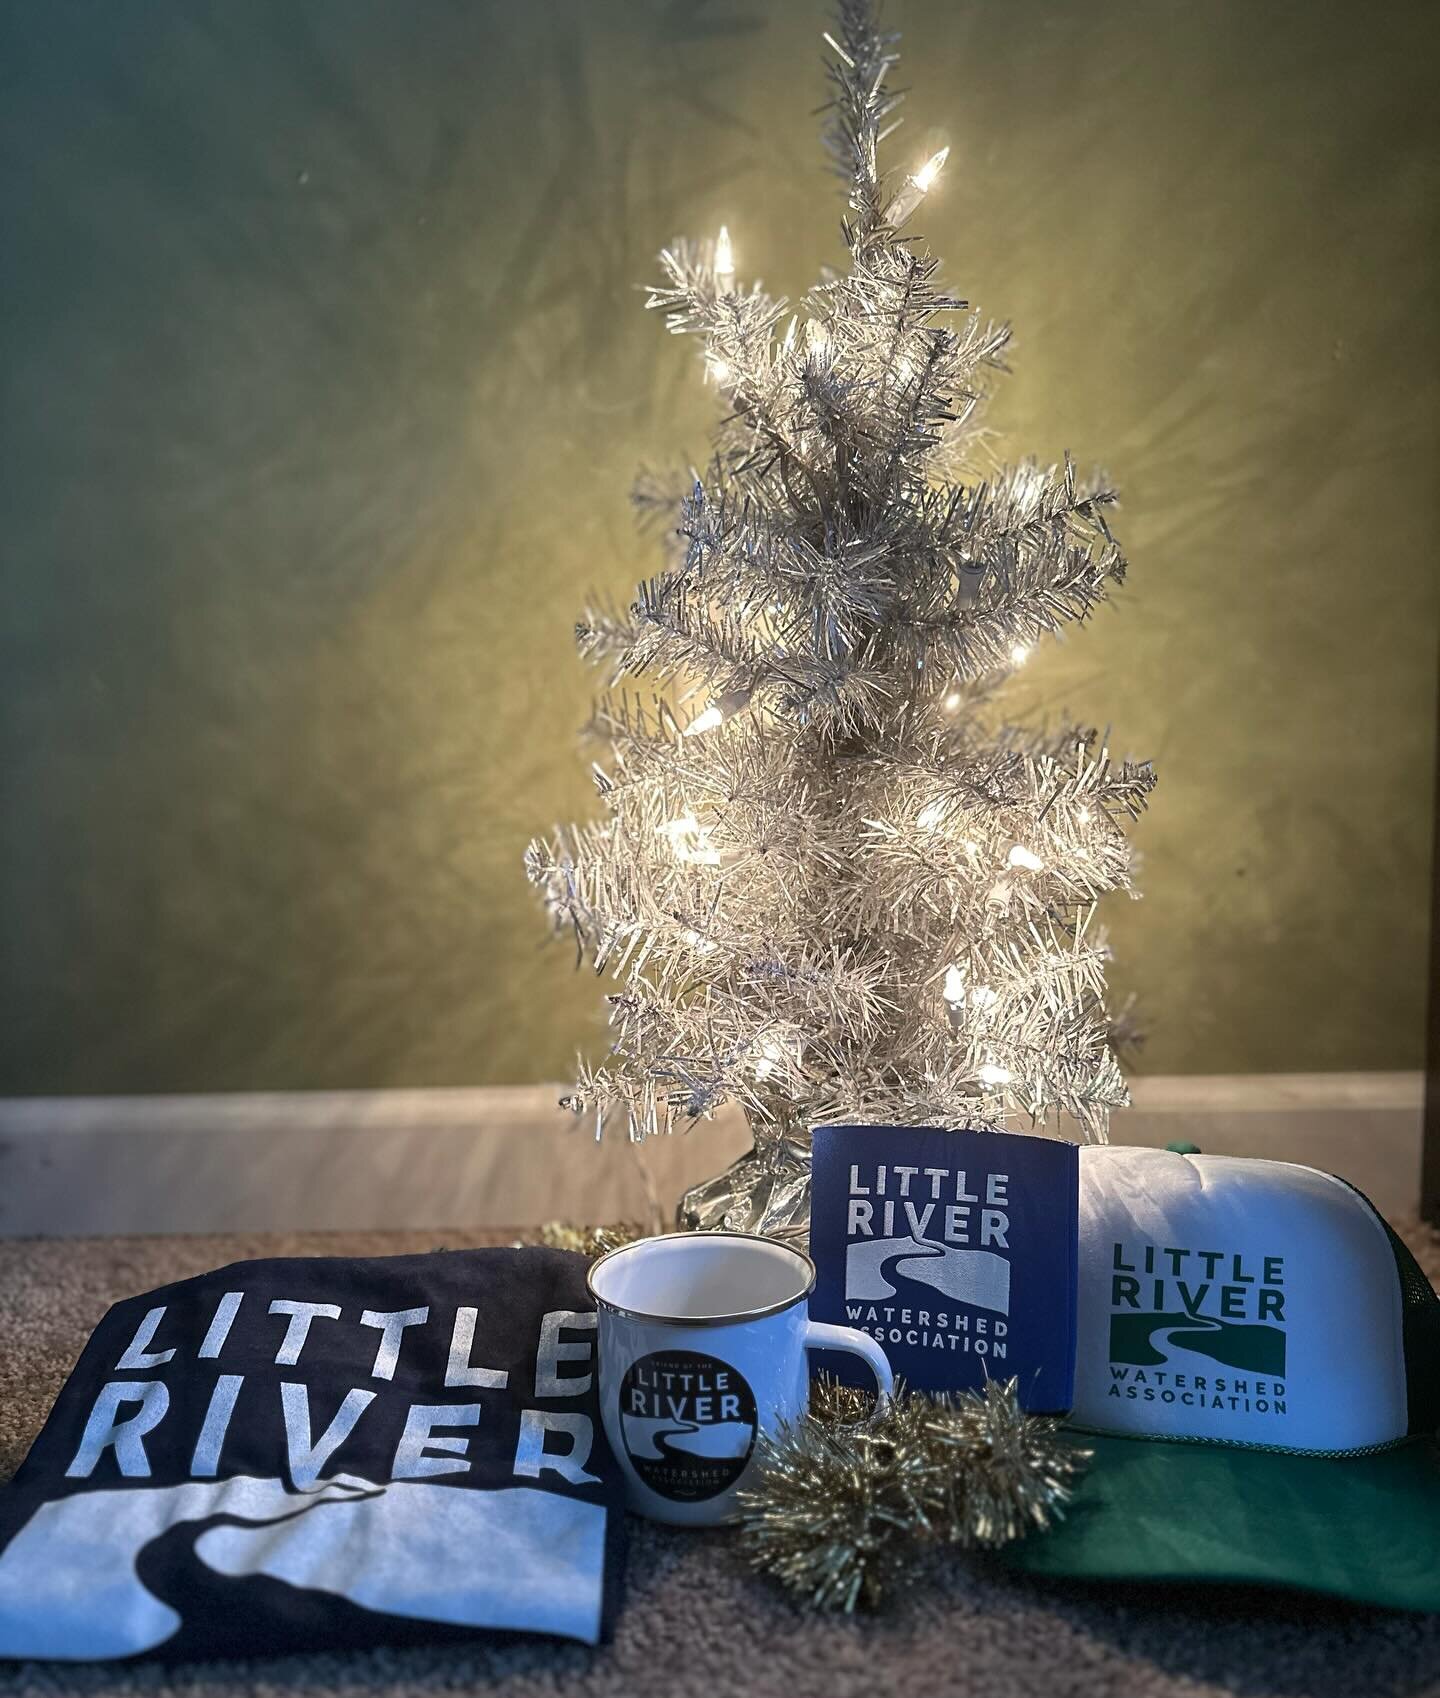 Need a last minute gift for that hard to find for person? Don&rsquo;t worry, we have you covered with a gift that also supports a good cause this holiday season! 🎁🎉
Click the link in our bio for all the available little River merch, and make sure y